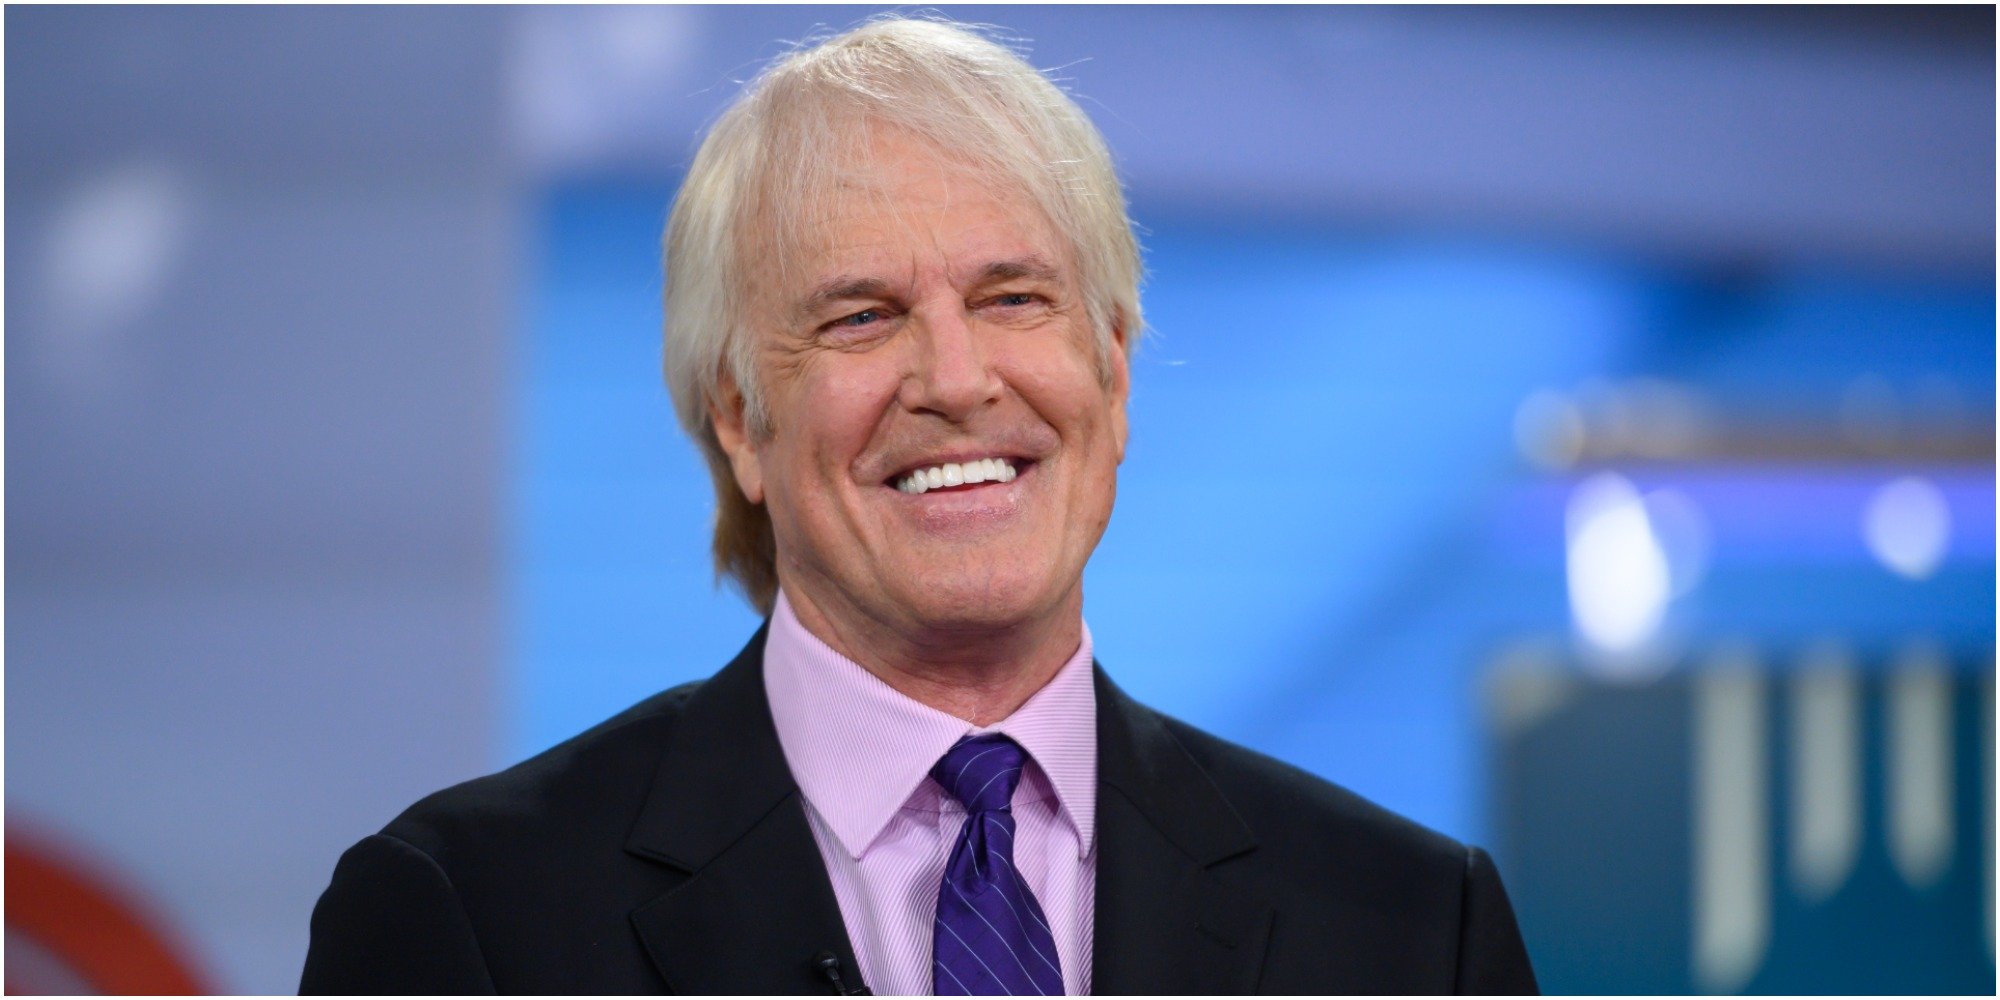 John Tesh admitted he battled a recurrence of his cancer during the pandemic.